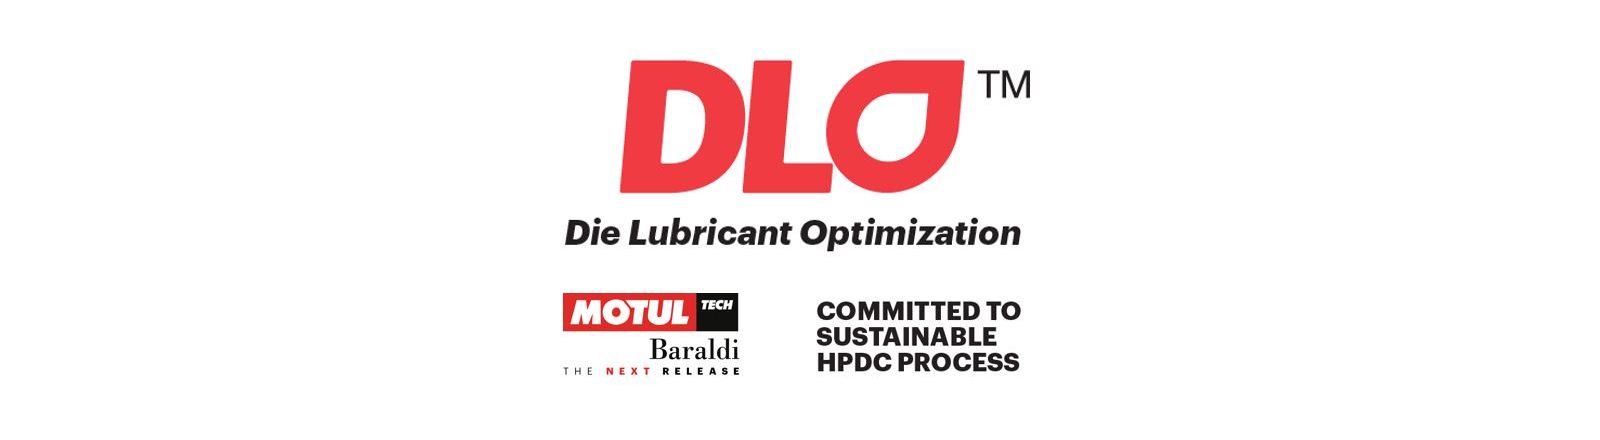 THE ROAD TO MINIMIZE DIE LUBRICATION IN HPDC